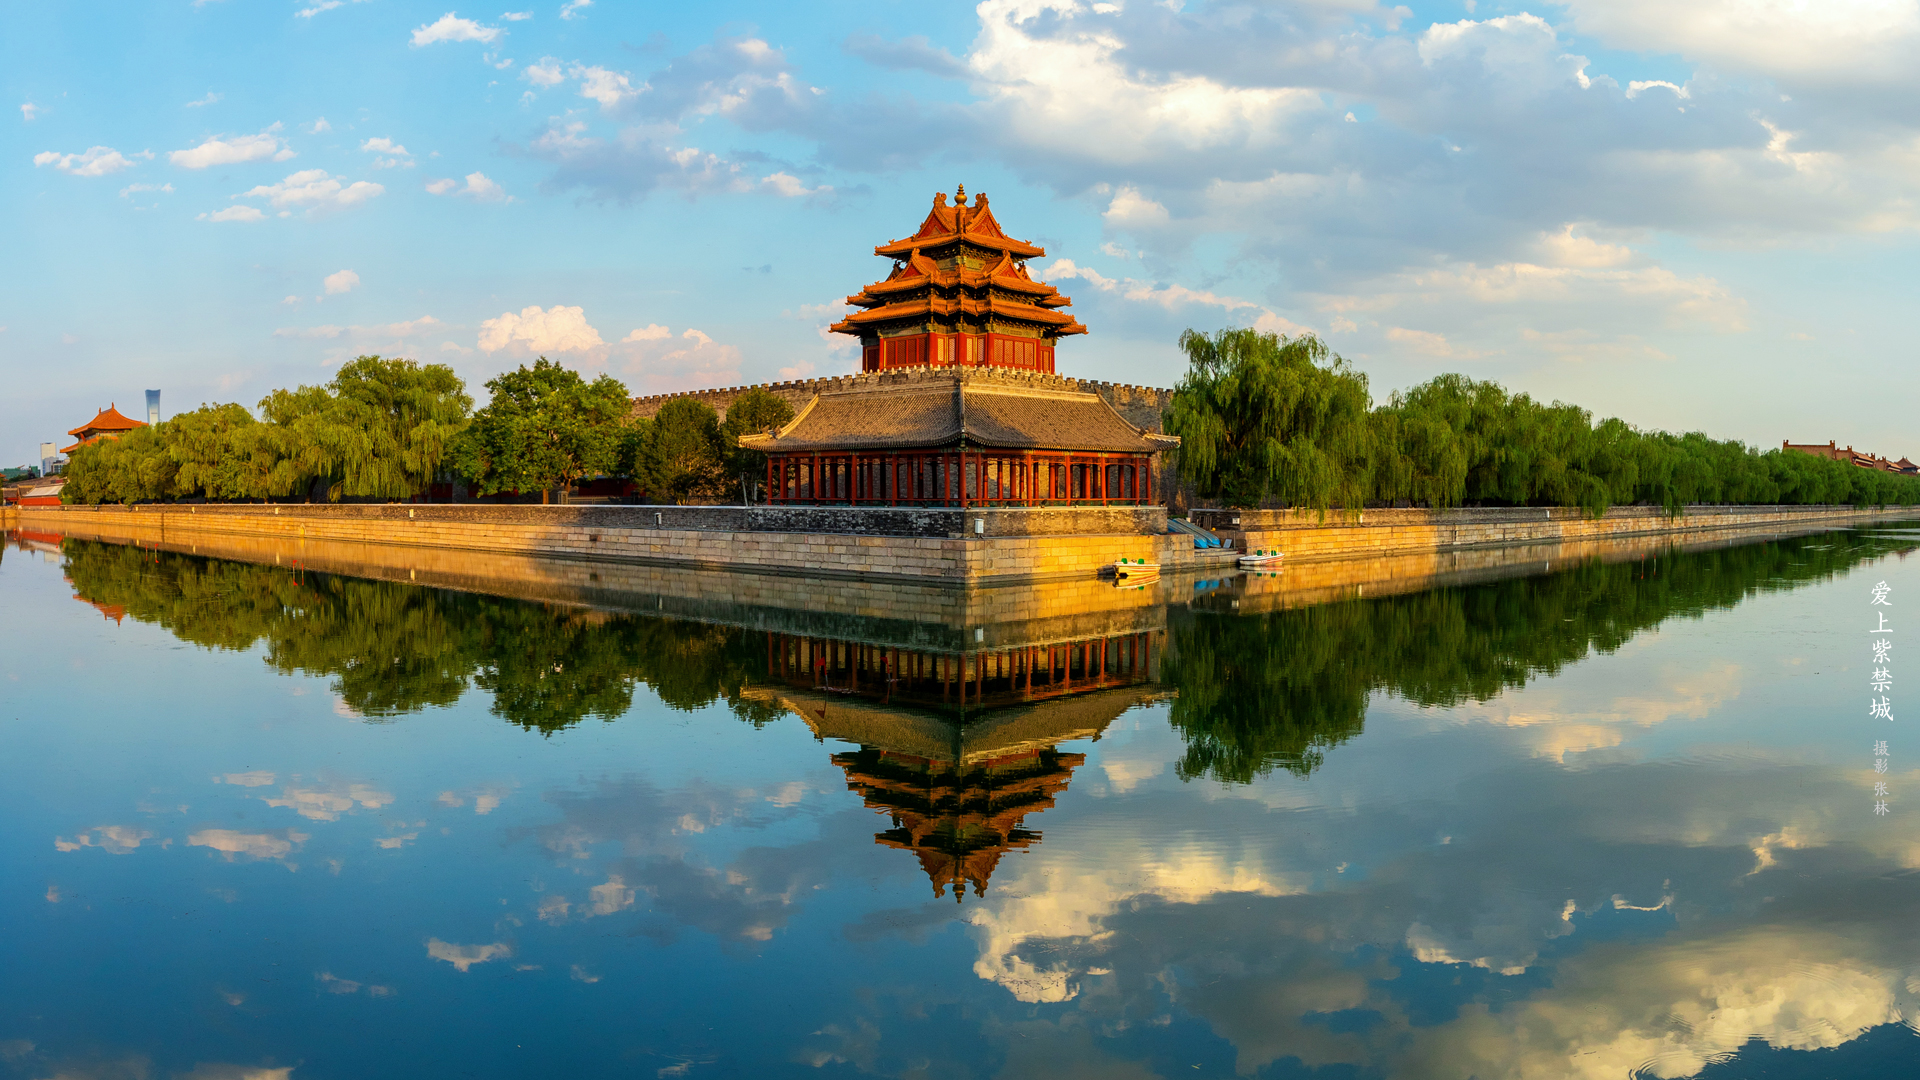 General 1920x1080 Chinese architecture The Imperial Palace sky